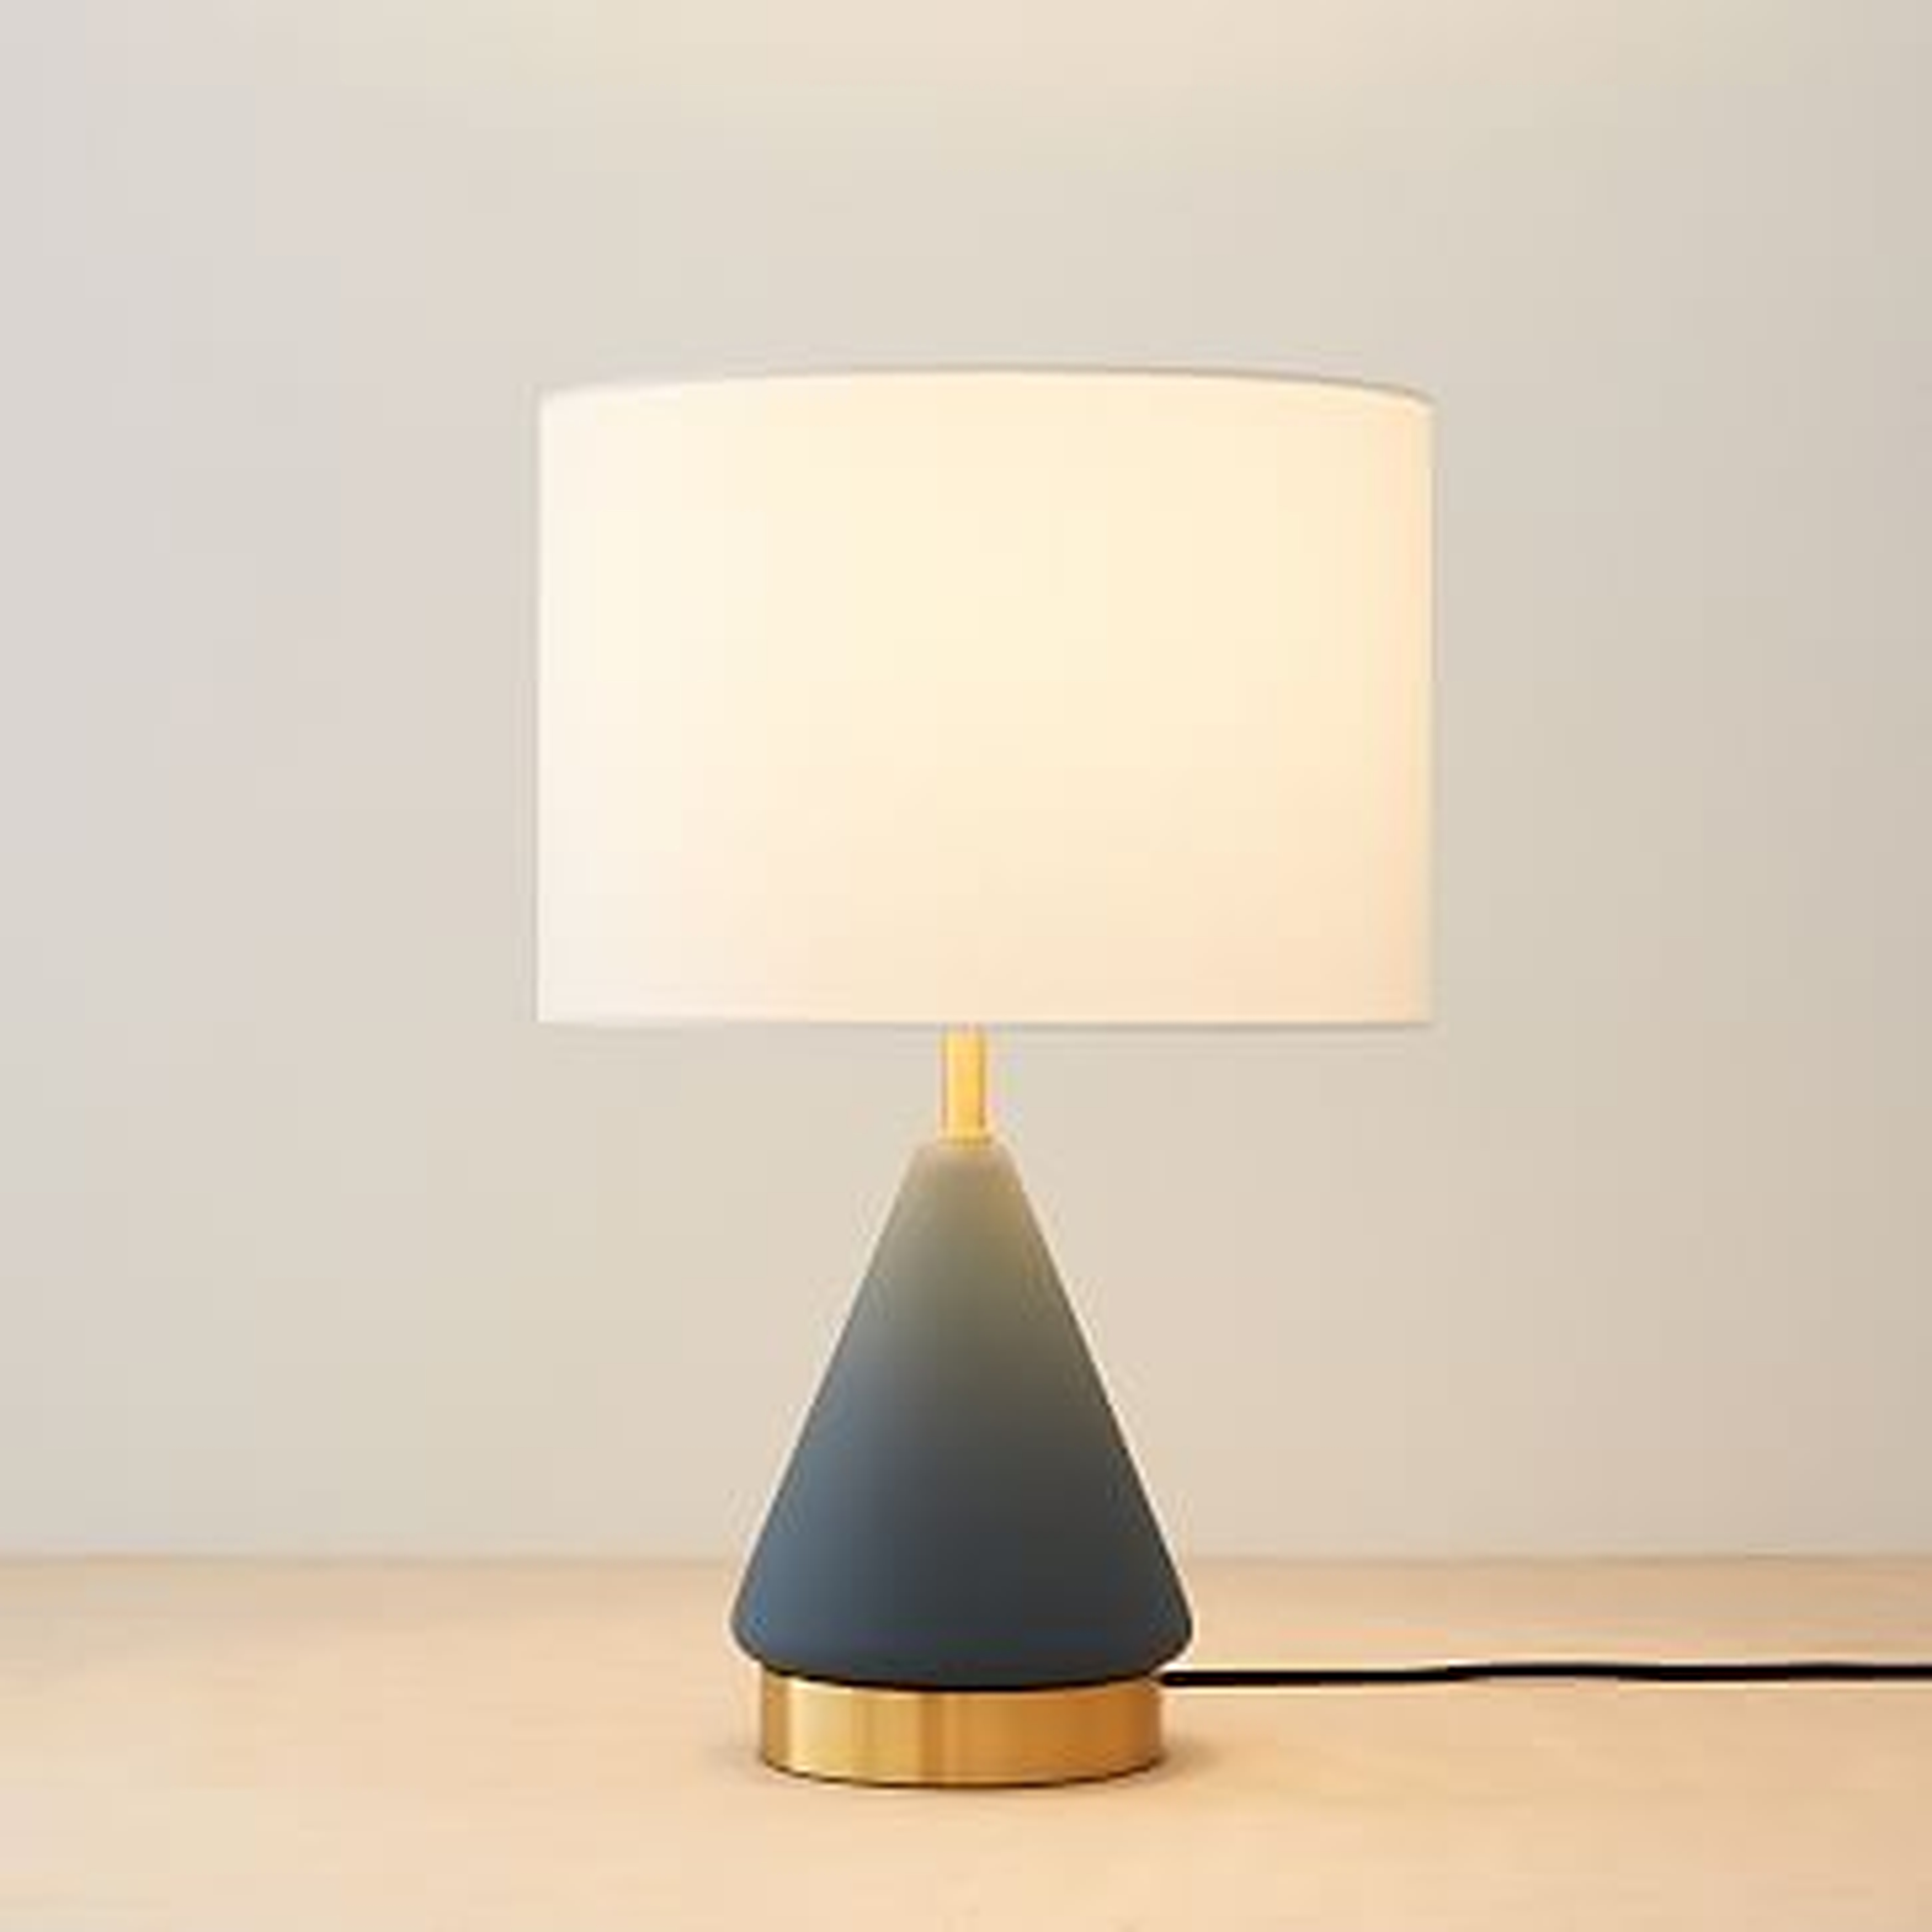 Metalized Glass Table Lamp, Small, Petrol Blue - West Elm